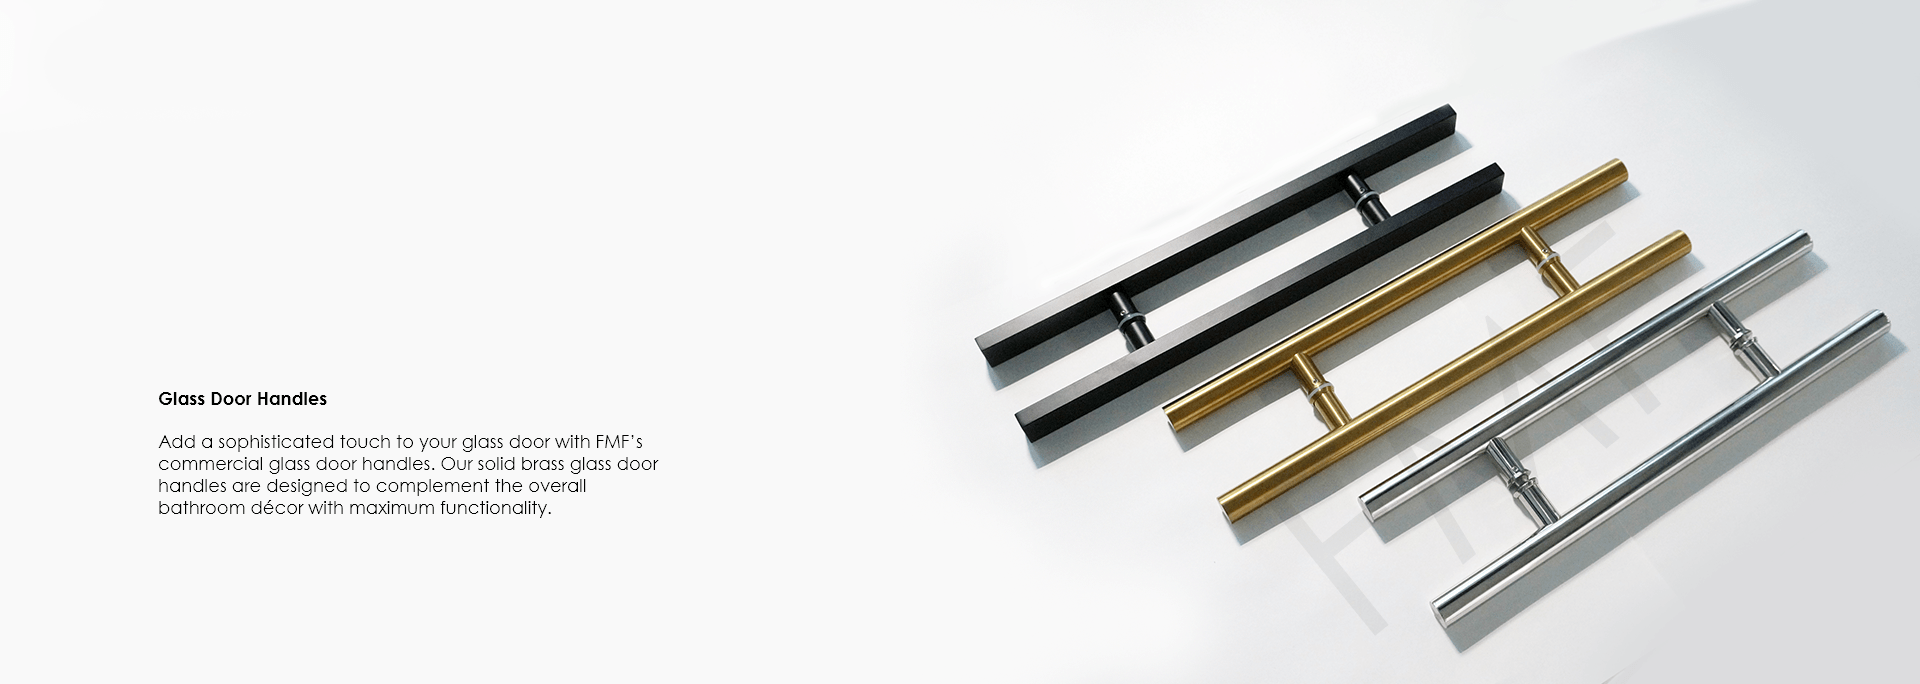 Add a sophisticated touch to your glass door with FMF’s commercial glass door handles. Our solid brass glass door handles are designed to complement the overall bathroom décor with maximum functionality.